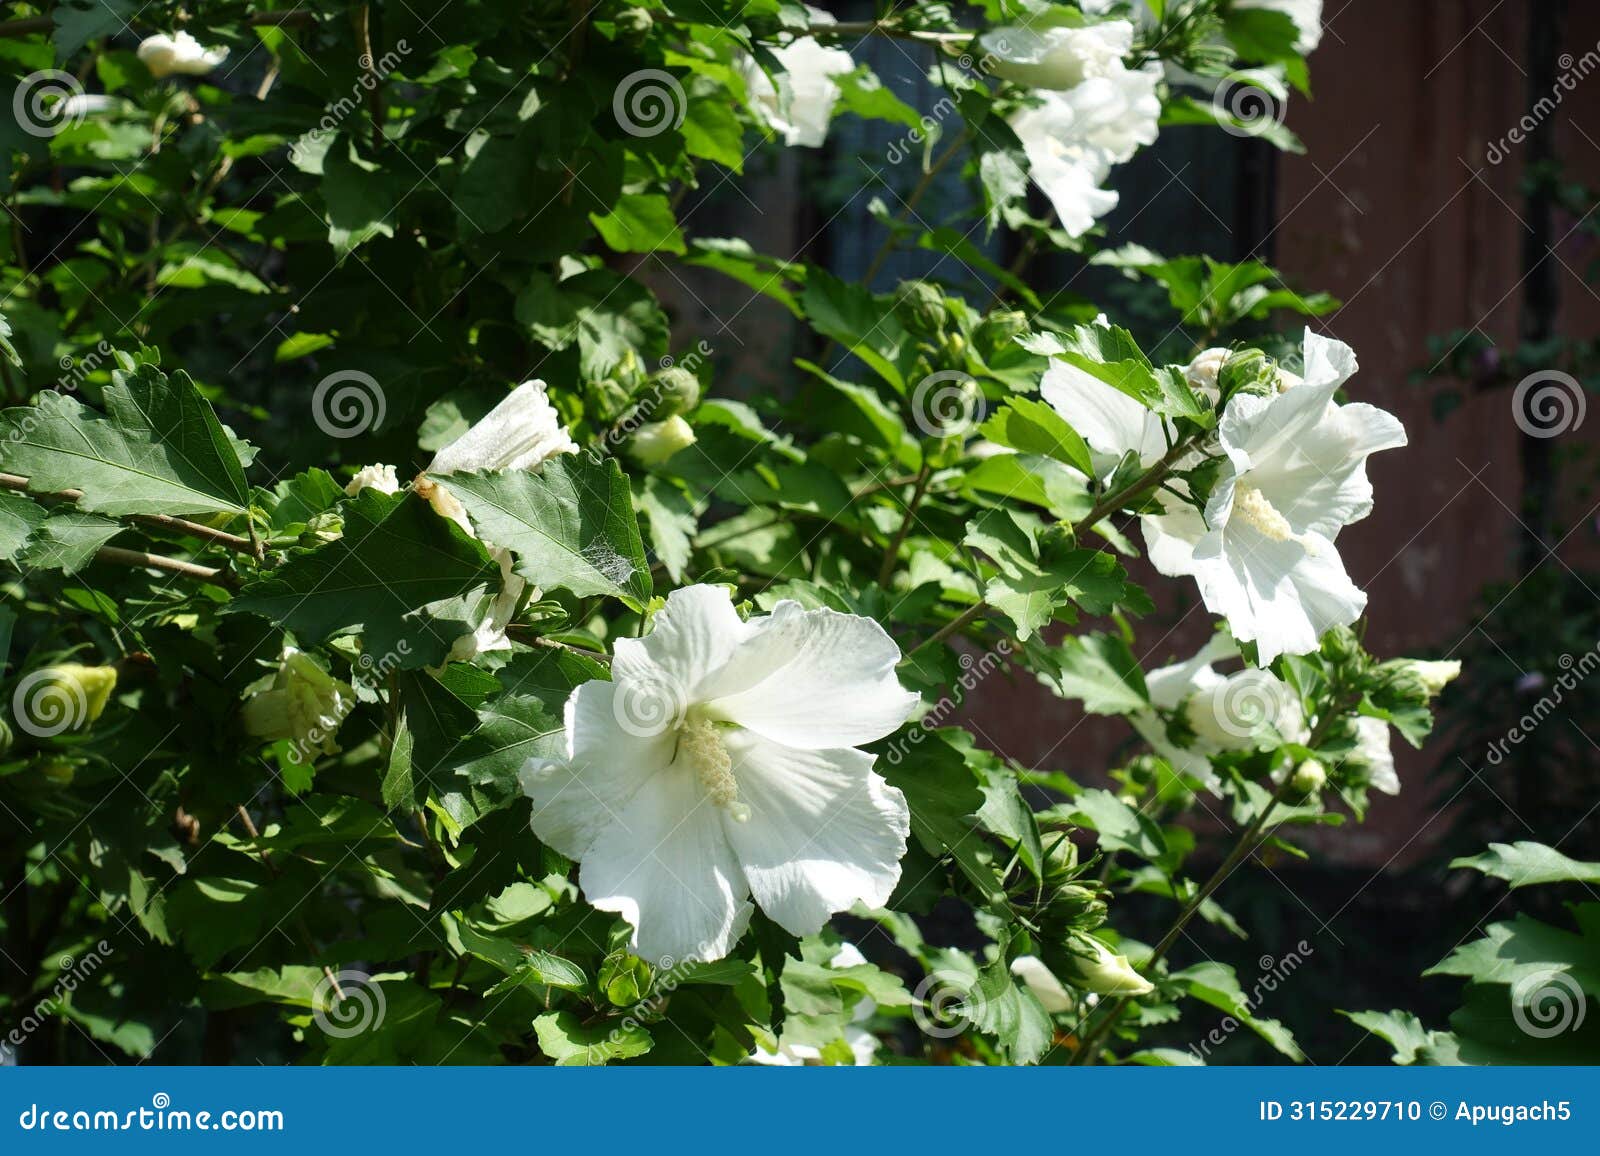 several pure white flowers in the leafage of hibiscus syriacus